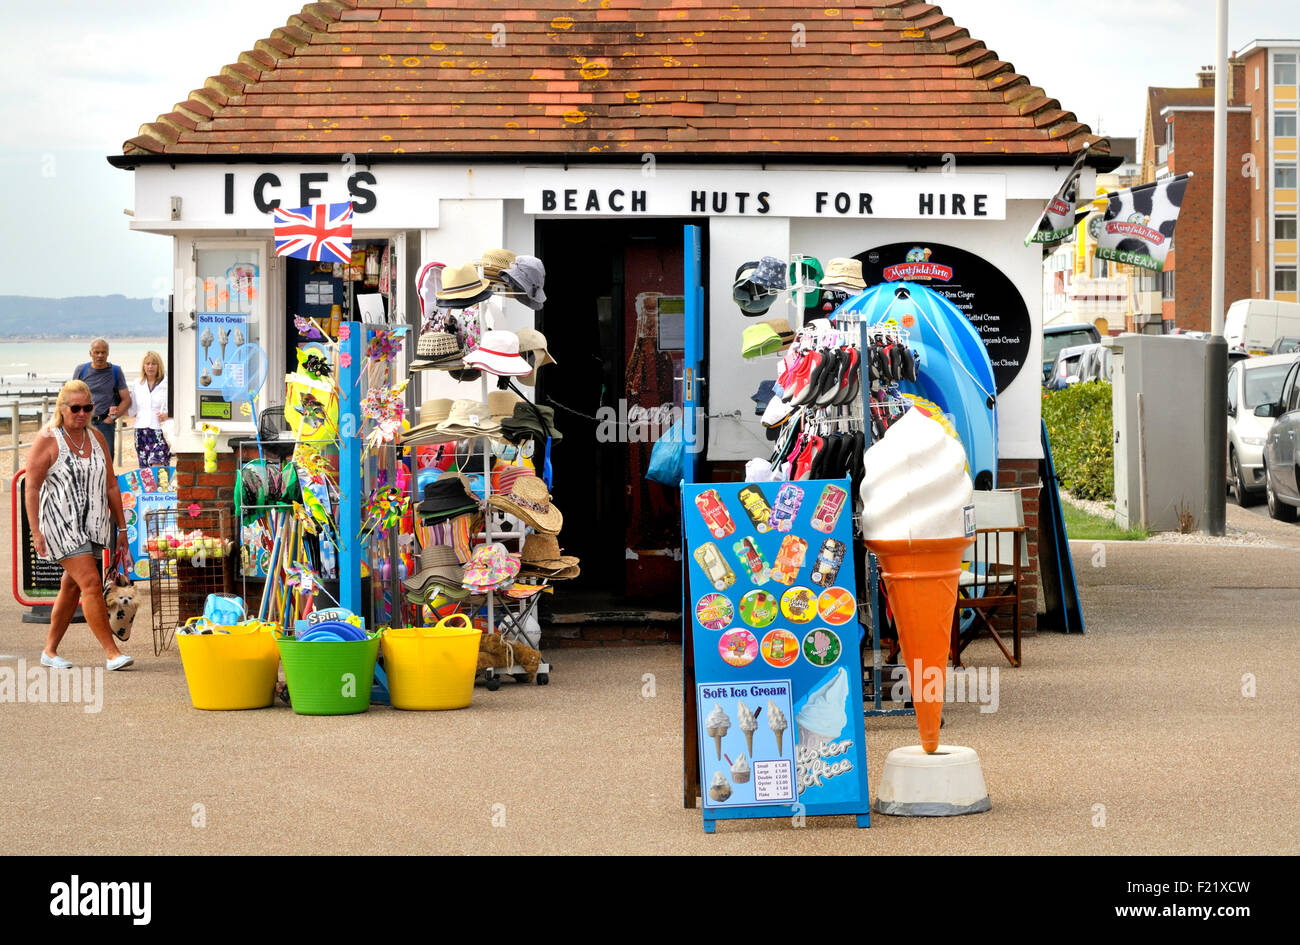 Bexhill-on-Sea, East Sussex, England, UK. Small seafront building selling ice cream and souvenirs and renting beach huts Stock Photo